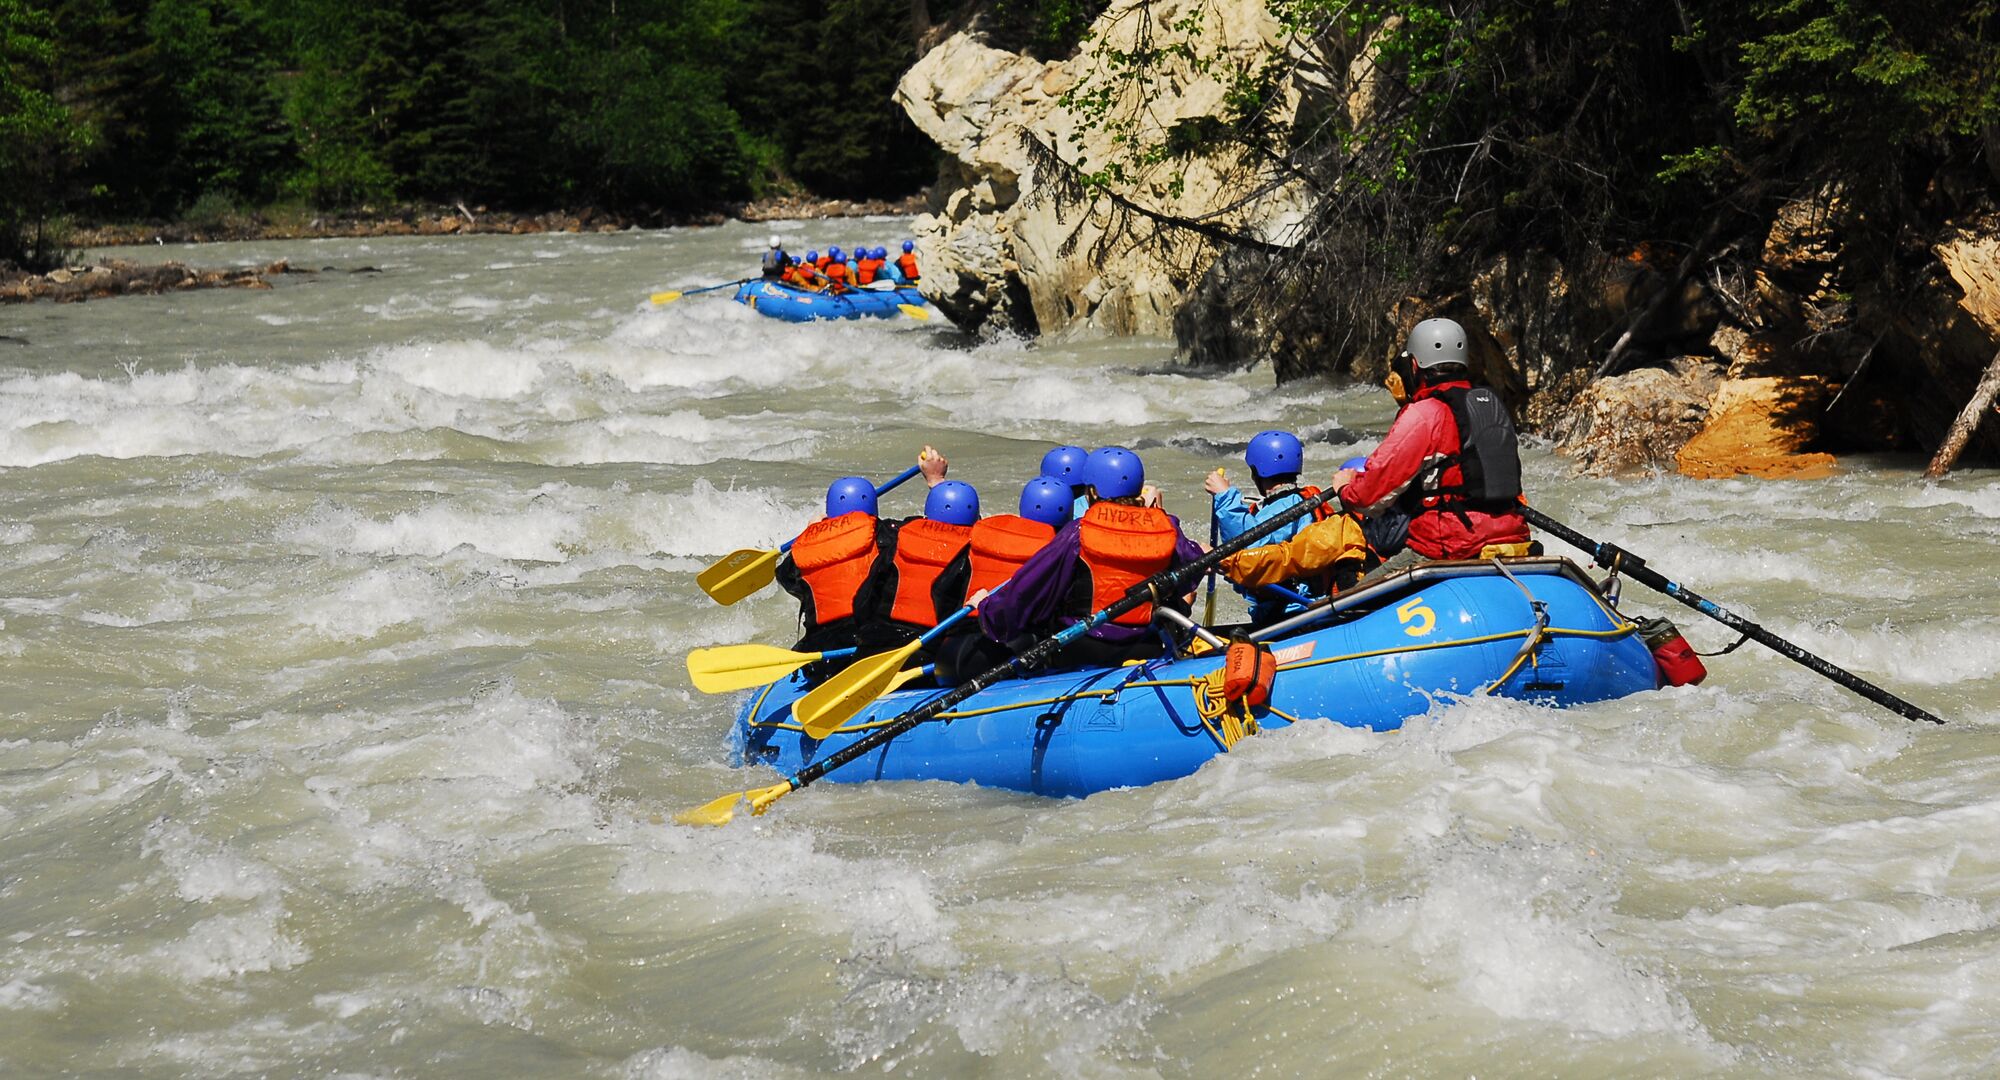 A group of people in a raft paddling through rapids on a white water rafting tour